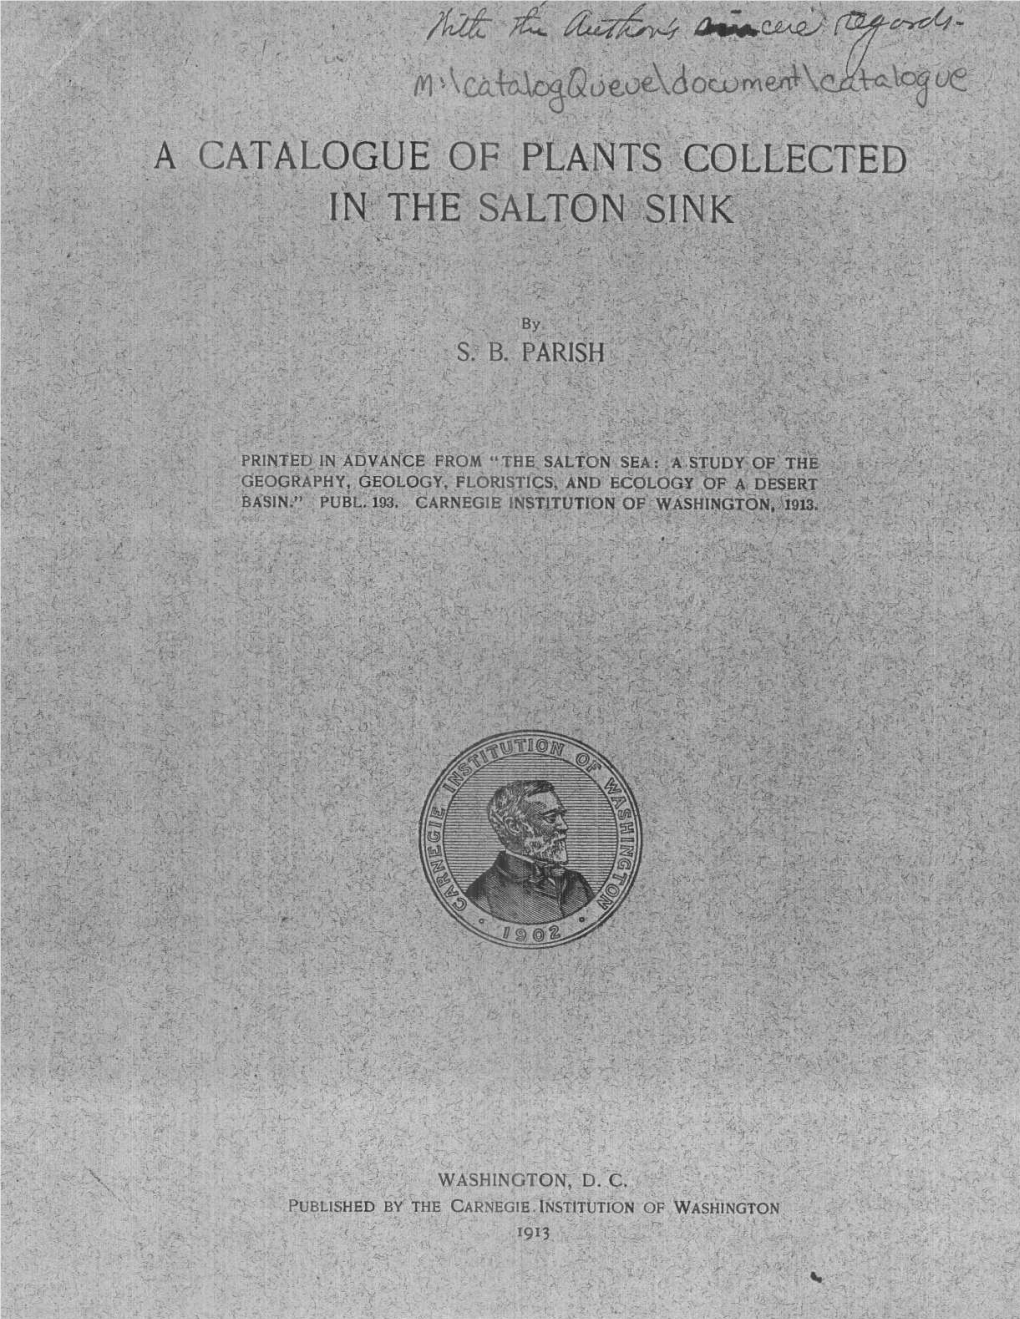 Catalogue of Plants Collected in the Salton Sink